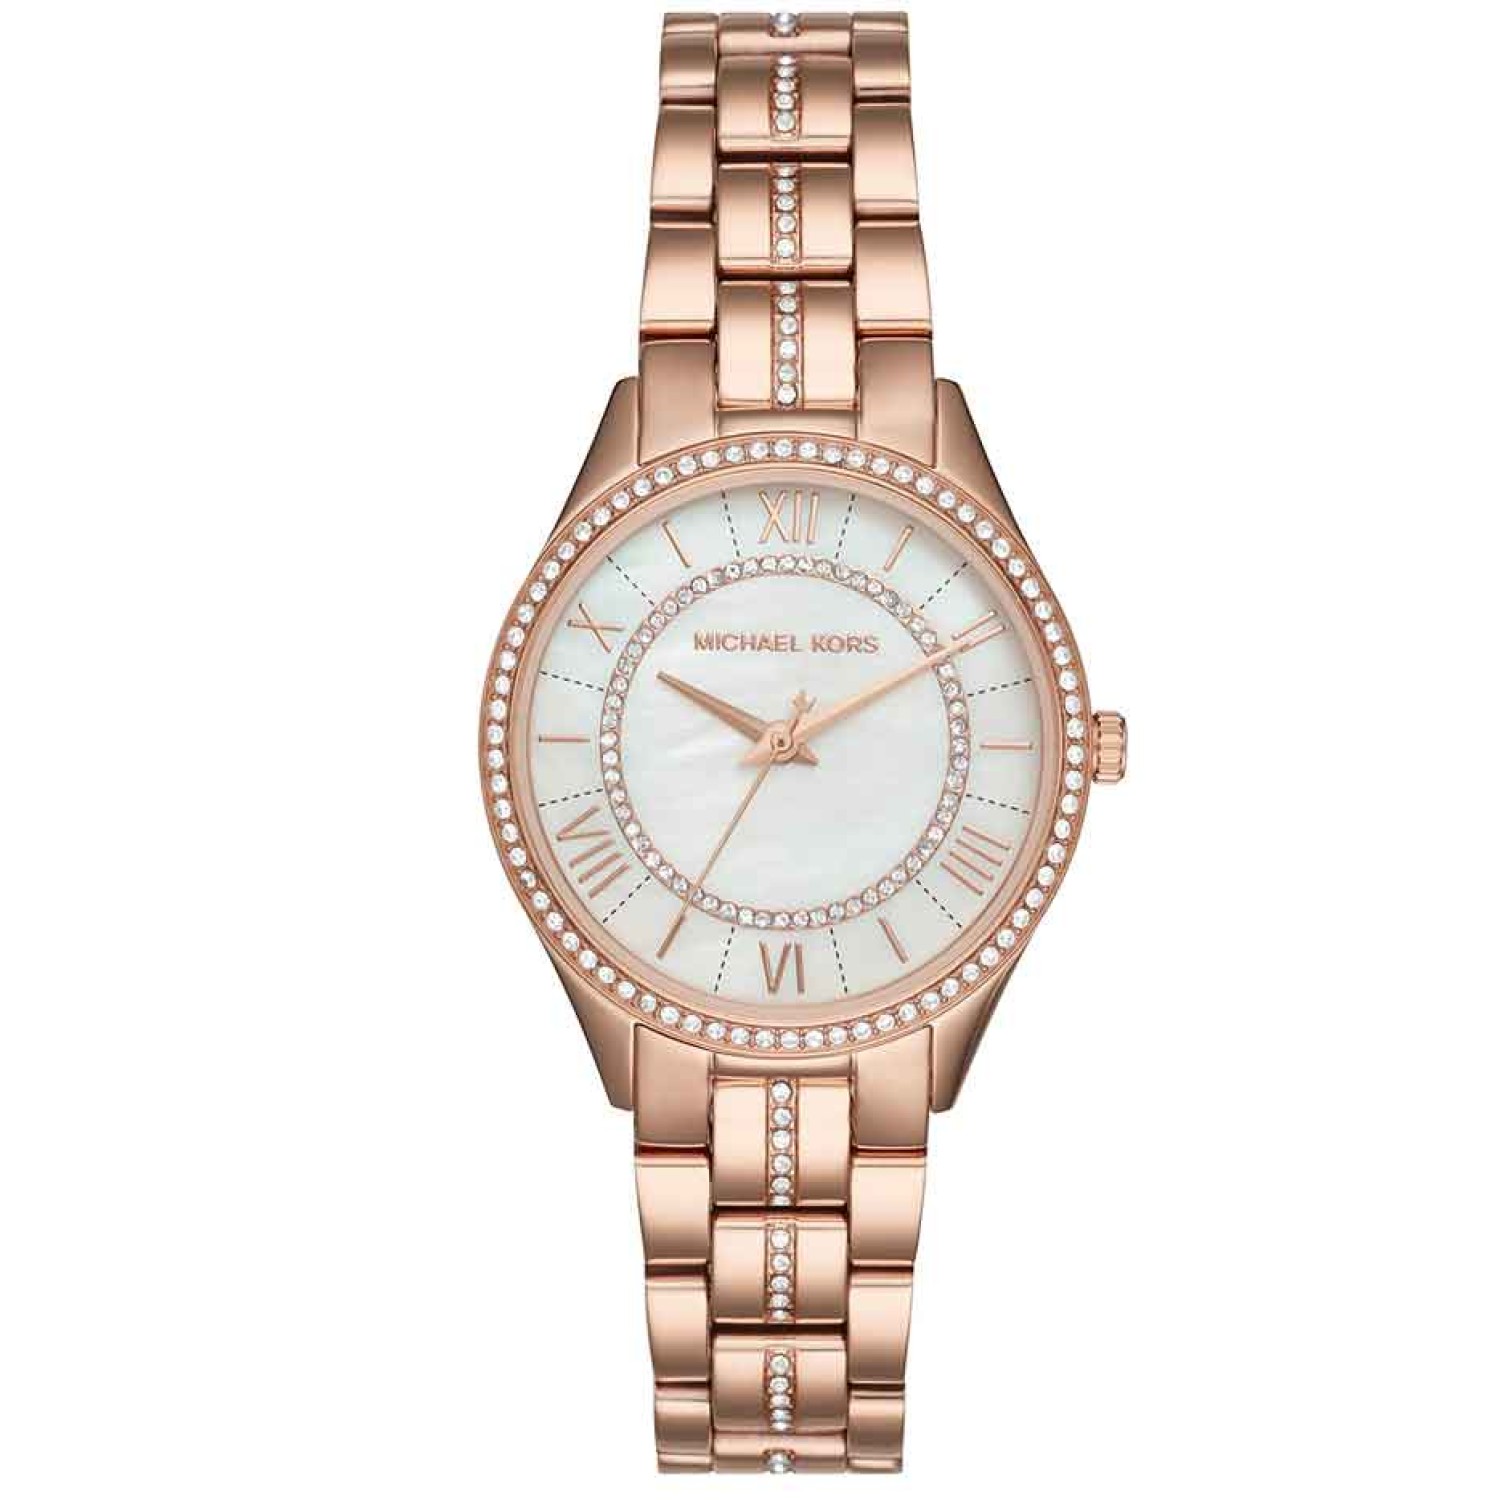 MK3716 Michael Kors Lauryn Rose Gold Tone  Watch. A sleek three-link-bracelet with glitz detailing down the center and sparkling crystal topring make the MK3716 rose gold-tone Michael Kors Lauryn this seasons most irresistible timepiece. The chic white di